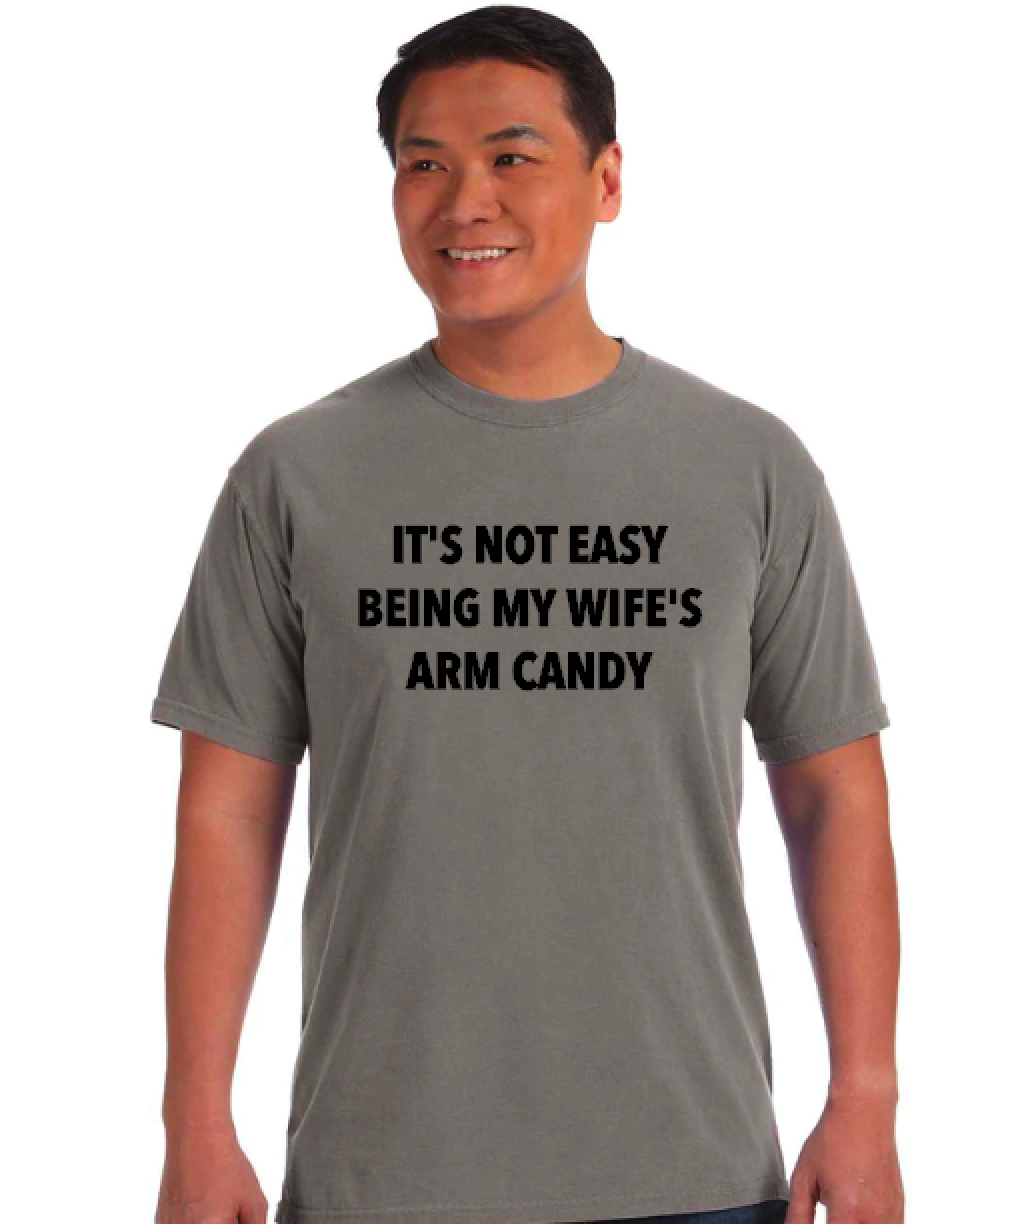 It's Not Easy Being My Wife's Arm Candy-Comfort Colors Tee